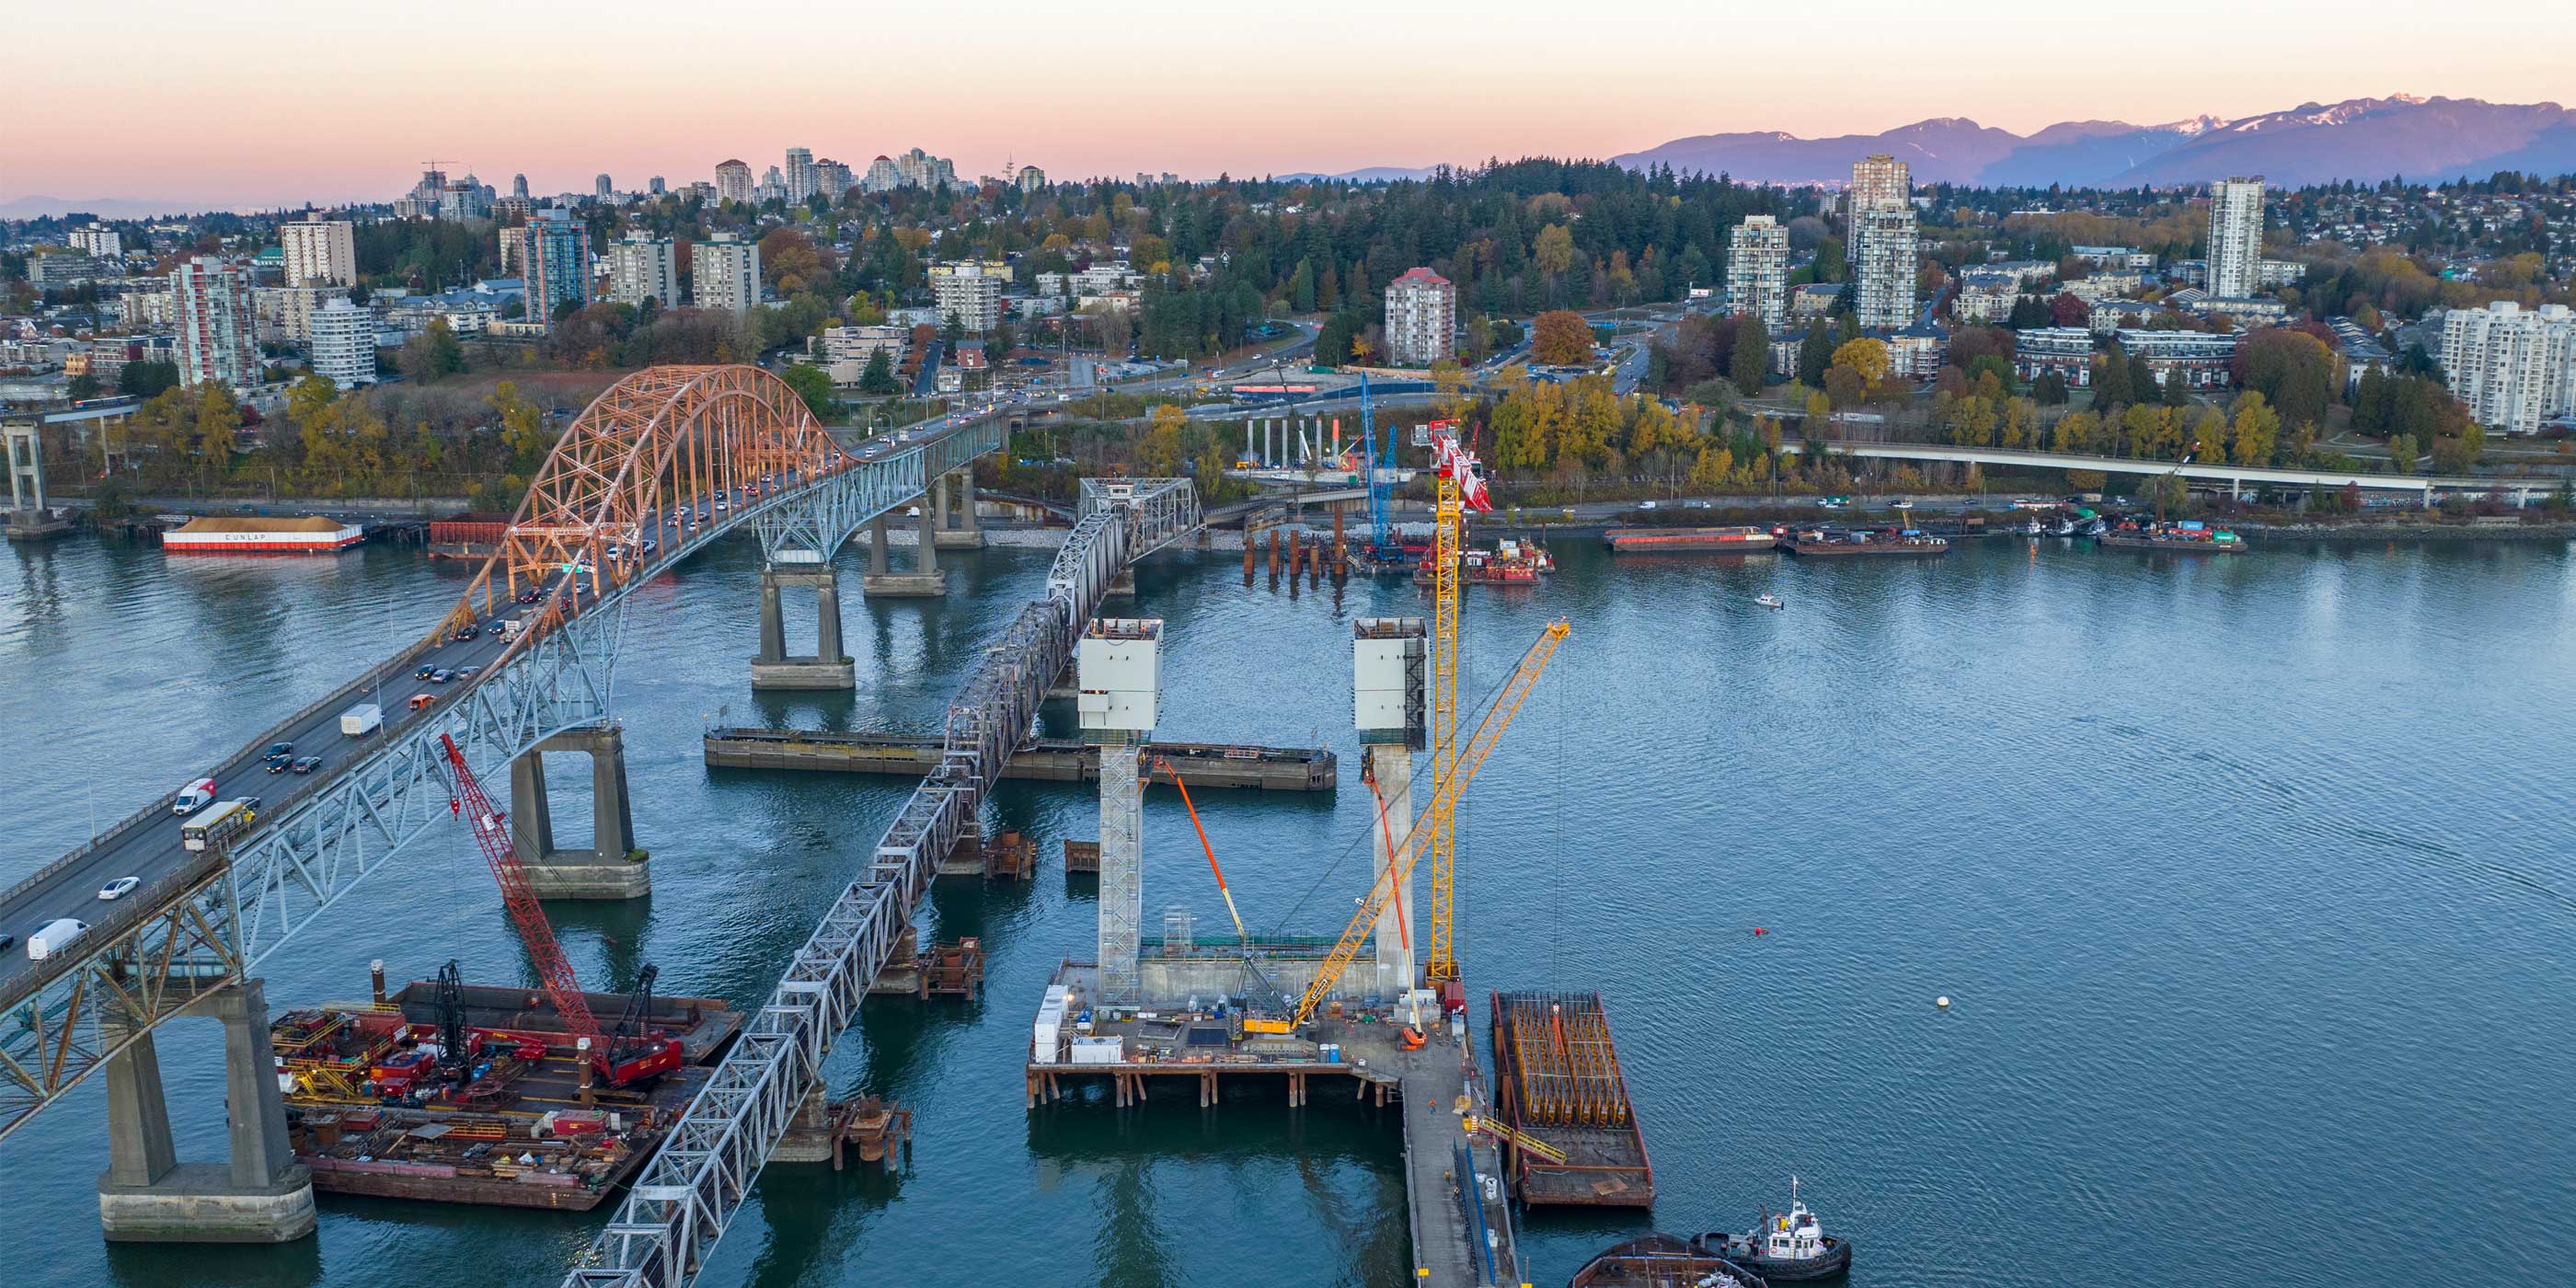 Crossing the Fraser River, the Pattullo Bridge is a key connection between New Westminster and Surrey in British Columbia. The bridge is being replaced with a new bridge that will improve safety and reliability.